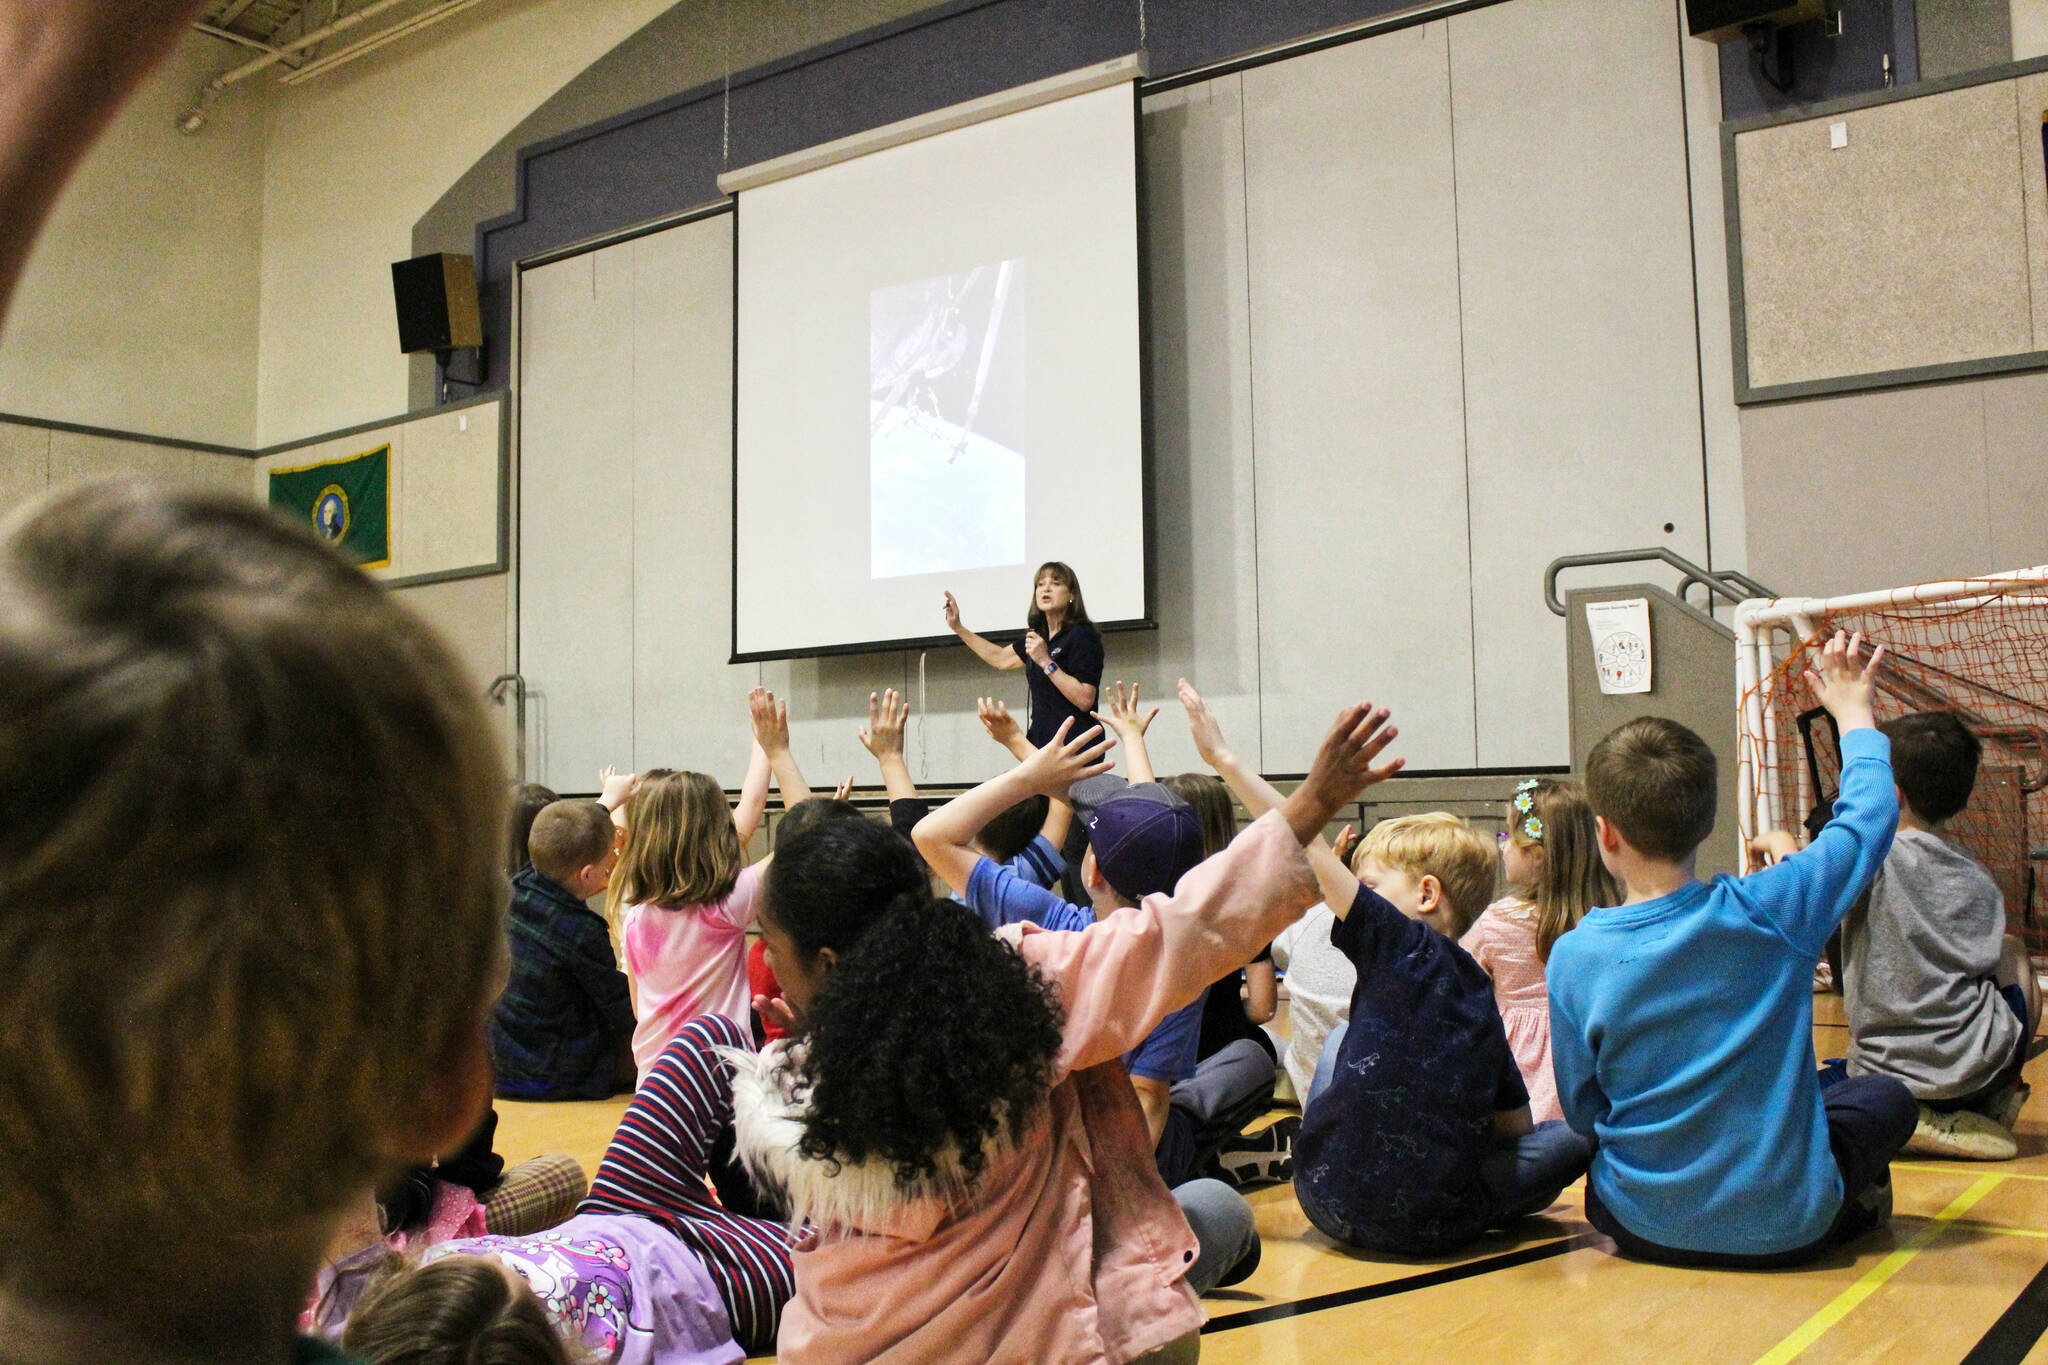 Former astronaut Dr. Tammy Jernigan speaking at White River School District’s Mountain Meadow Elementary school about her time in space. Photo by Ray Miller-Still